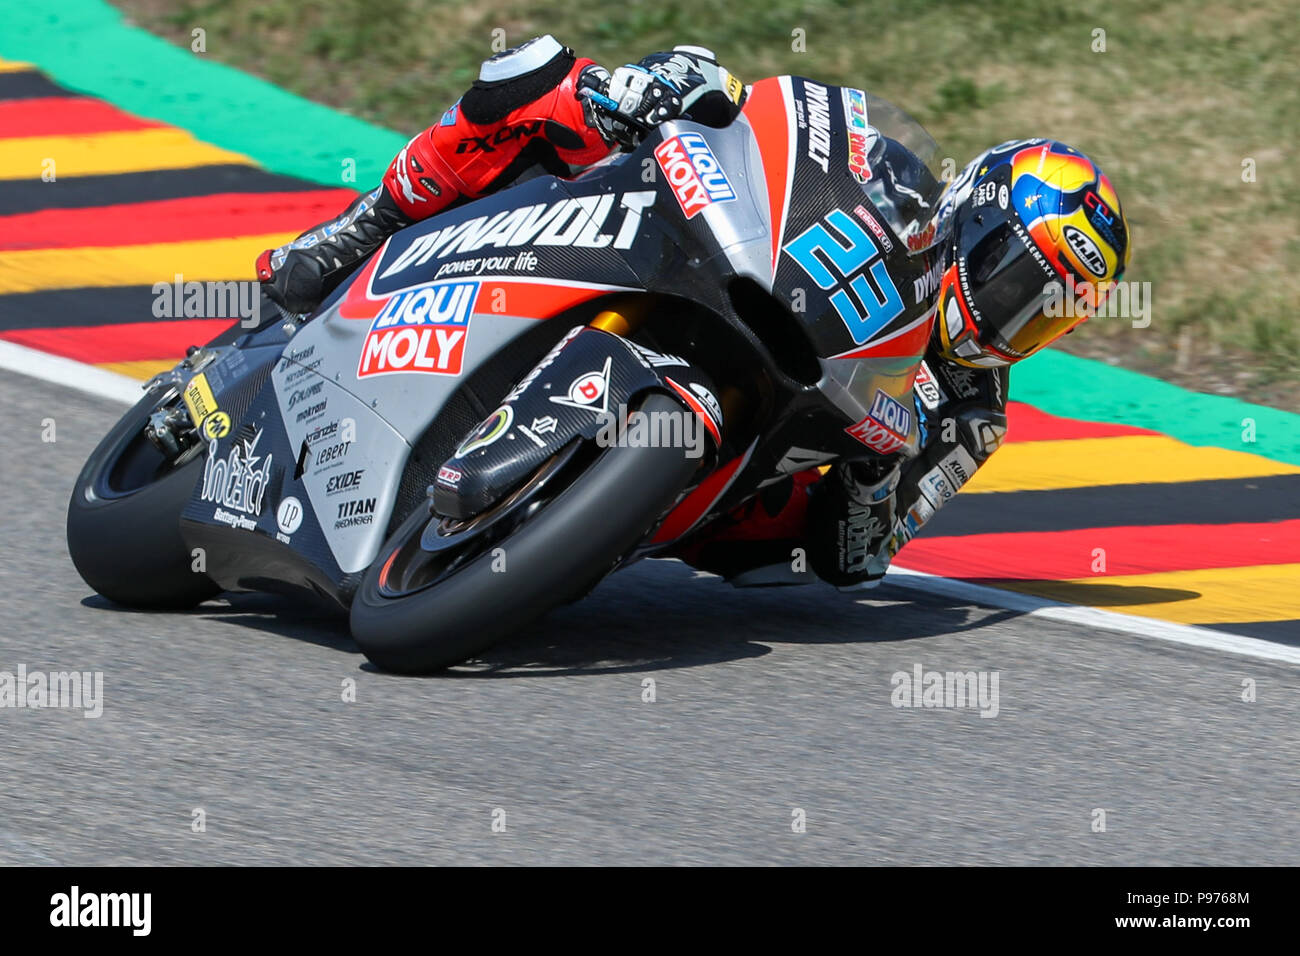 Hohenstein-Ernstthal, Germany. 15th July, 2018. German motorcycle Grand Prix, Moto2 at the Sachsenring: Marcel Schroetter (Germany, Dynavolt Intact GP) in action. Credit: Jan Woitas/dpa-Zentralbild/dpa/Alamy Live News Stock Photo